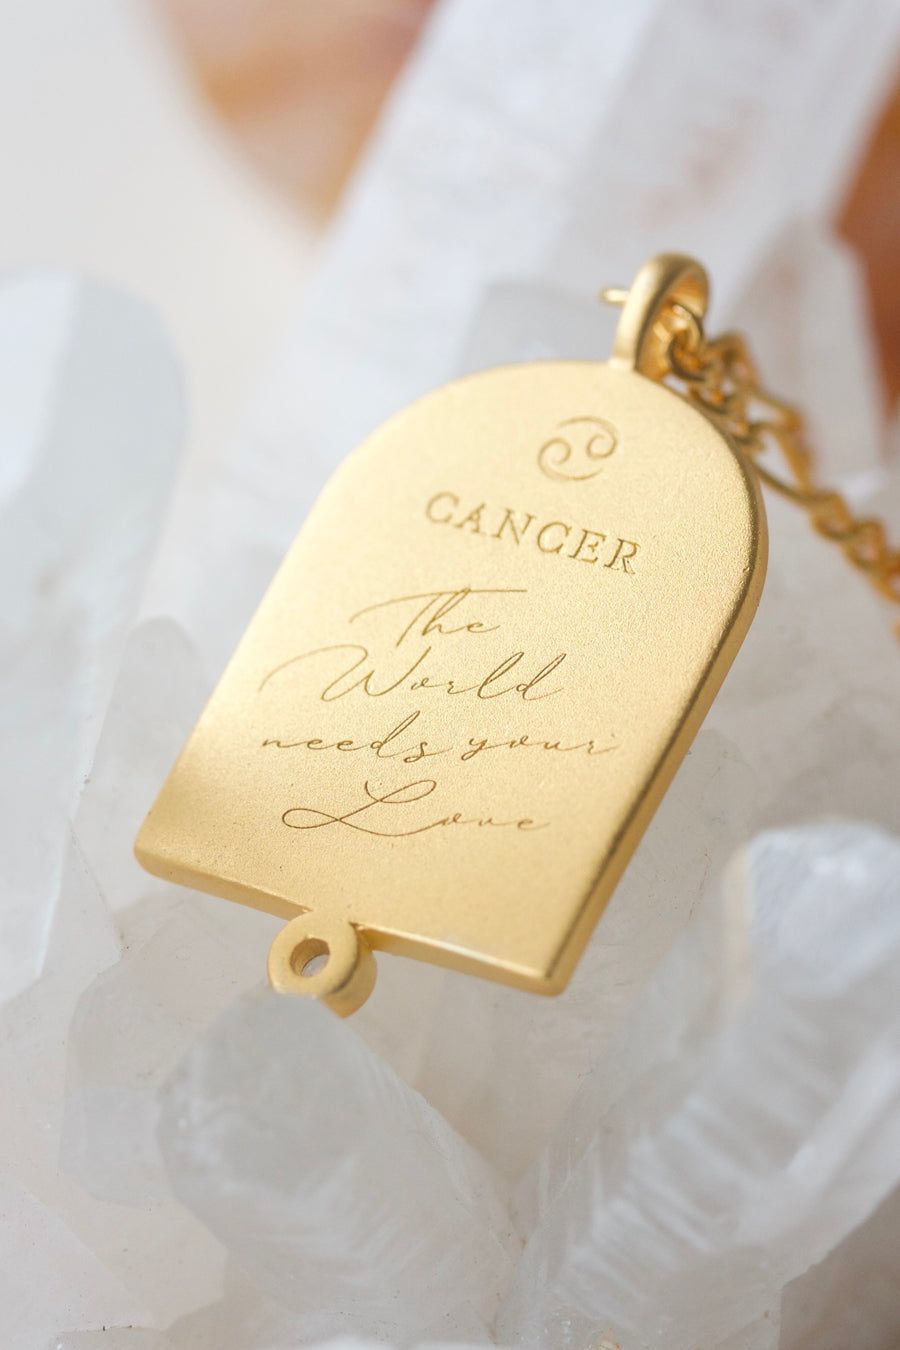 Cancer Zodiac Necklace in Gold. Birthday gift for astrology zodiac lover.